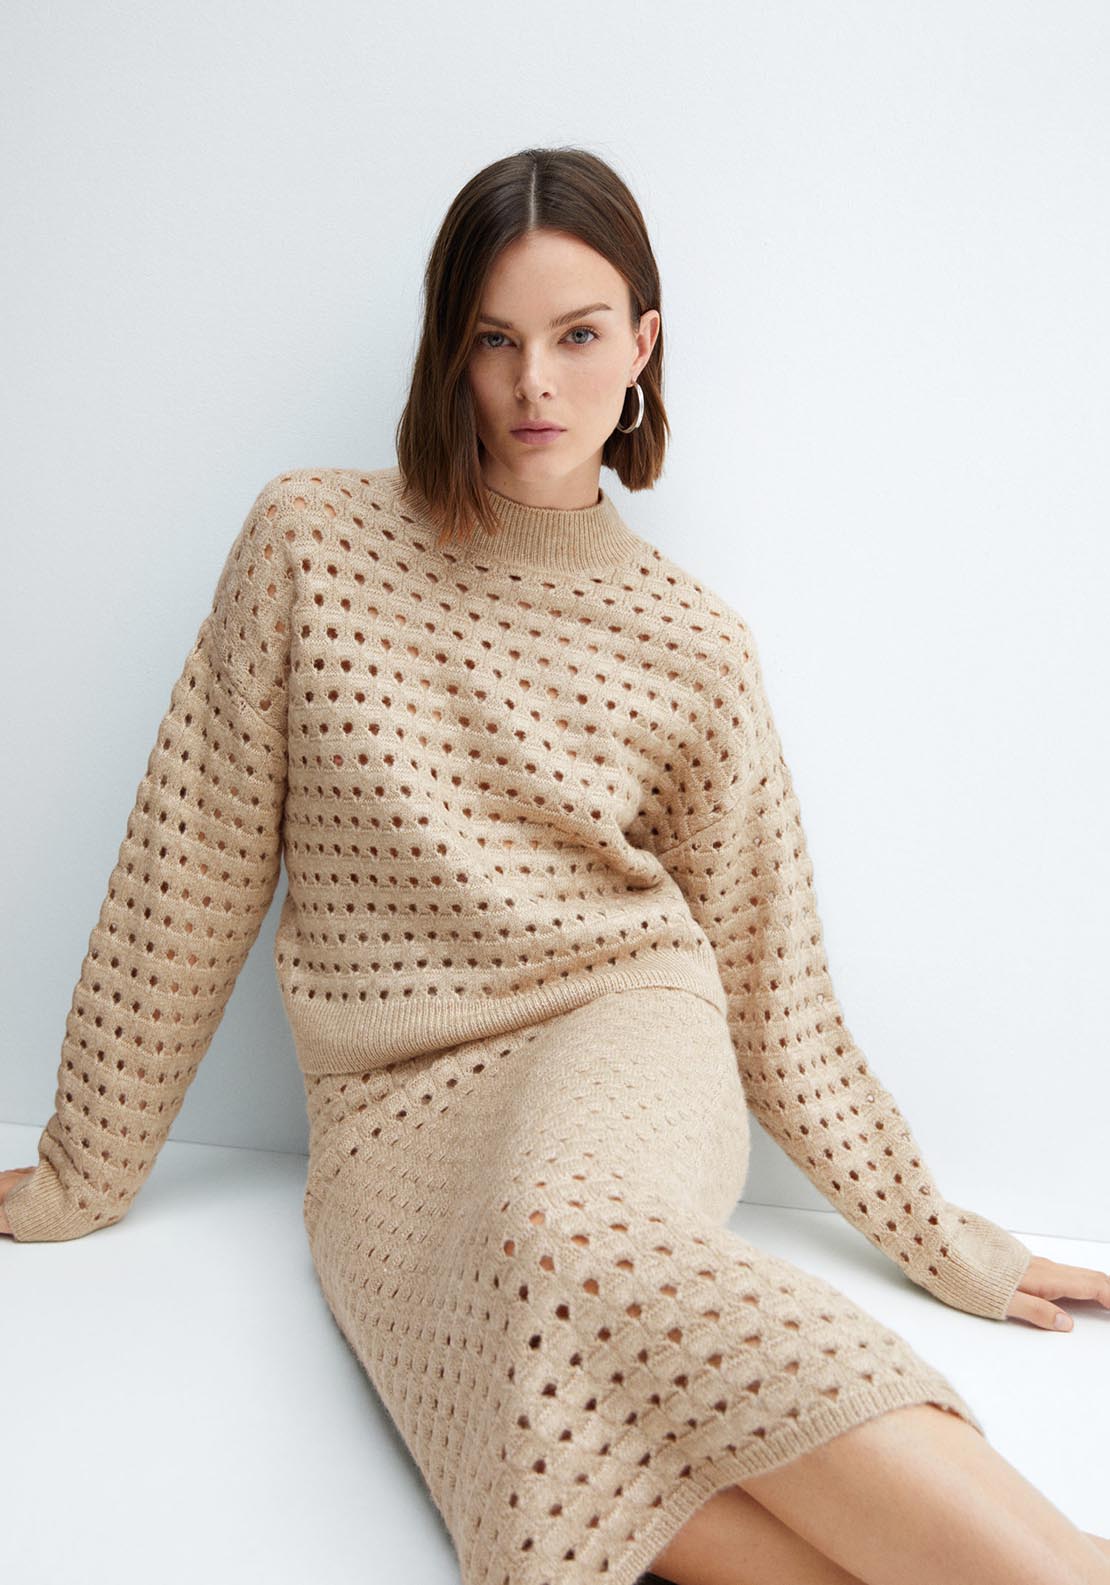 Mango Perkins neck knitted sweater 2 Shaws Department Stores